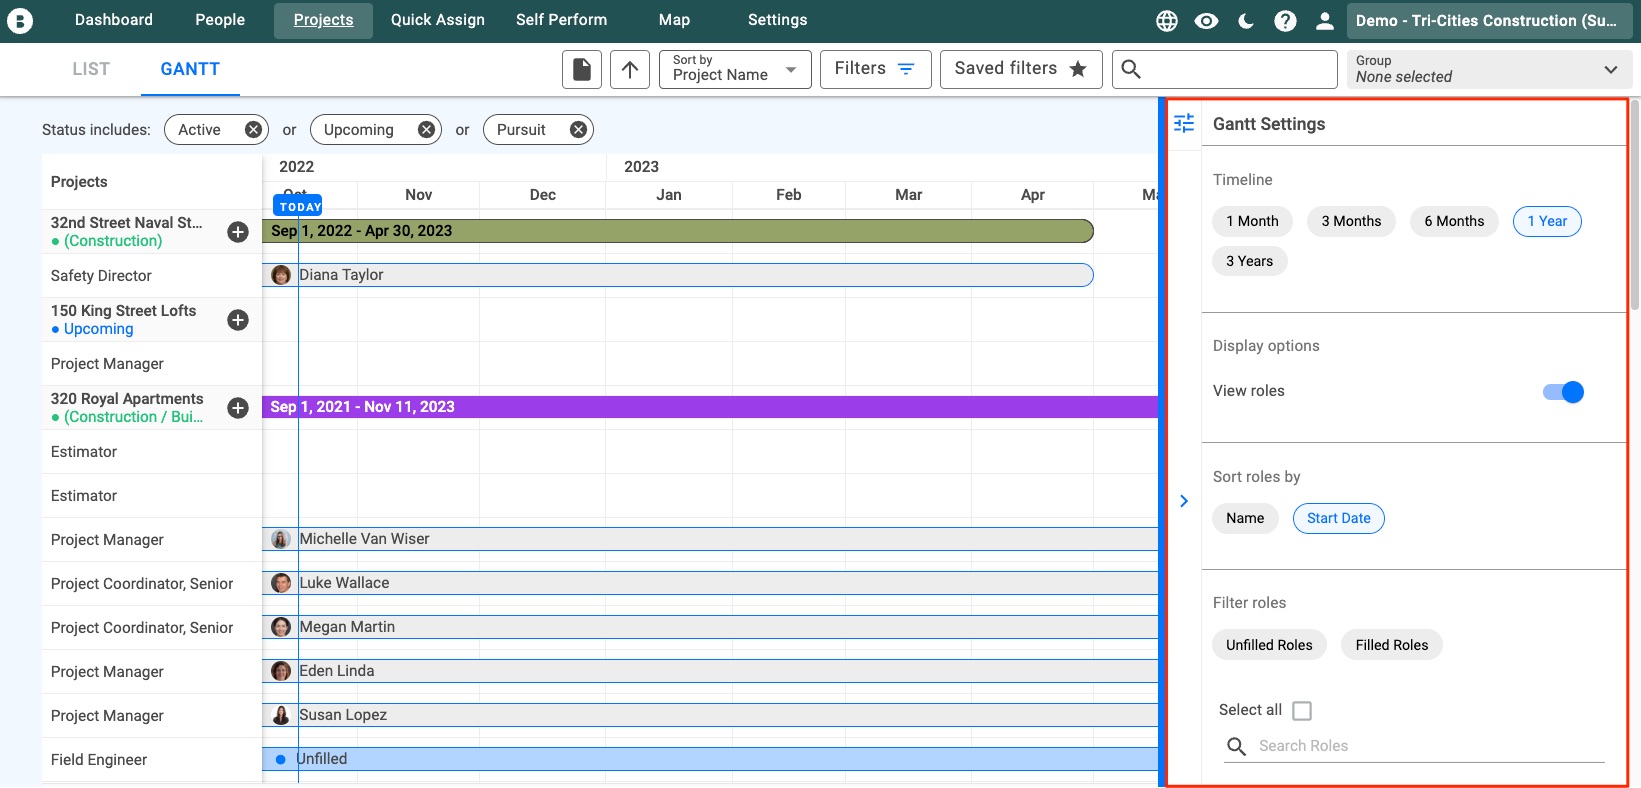 Article_Update_-_Managing_Roles_and_Allocations_From_the_Project_Gantt_-_1_1.jpg